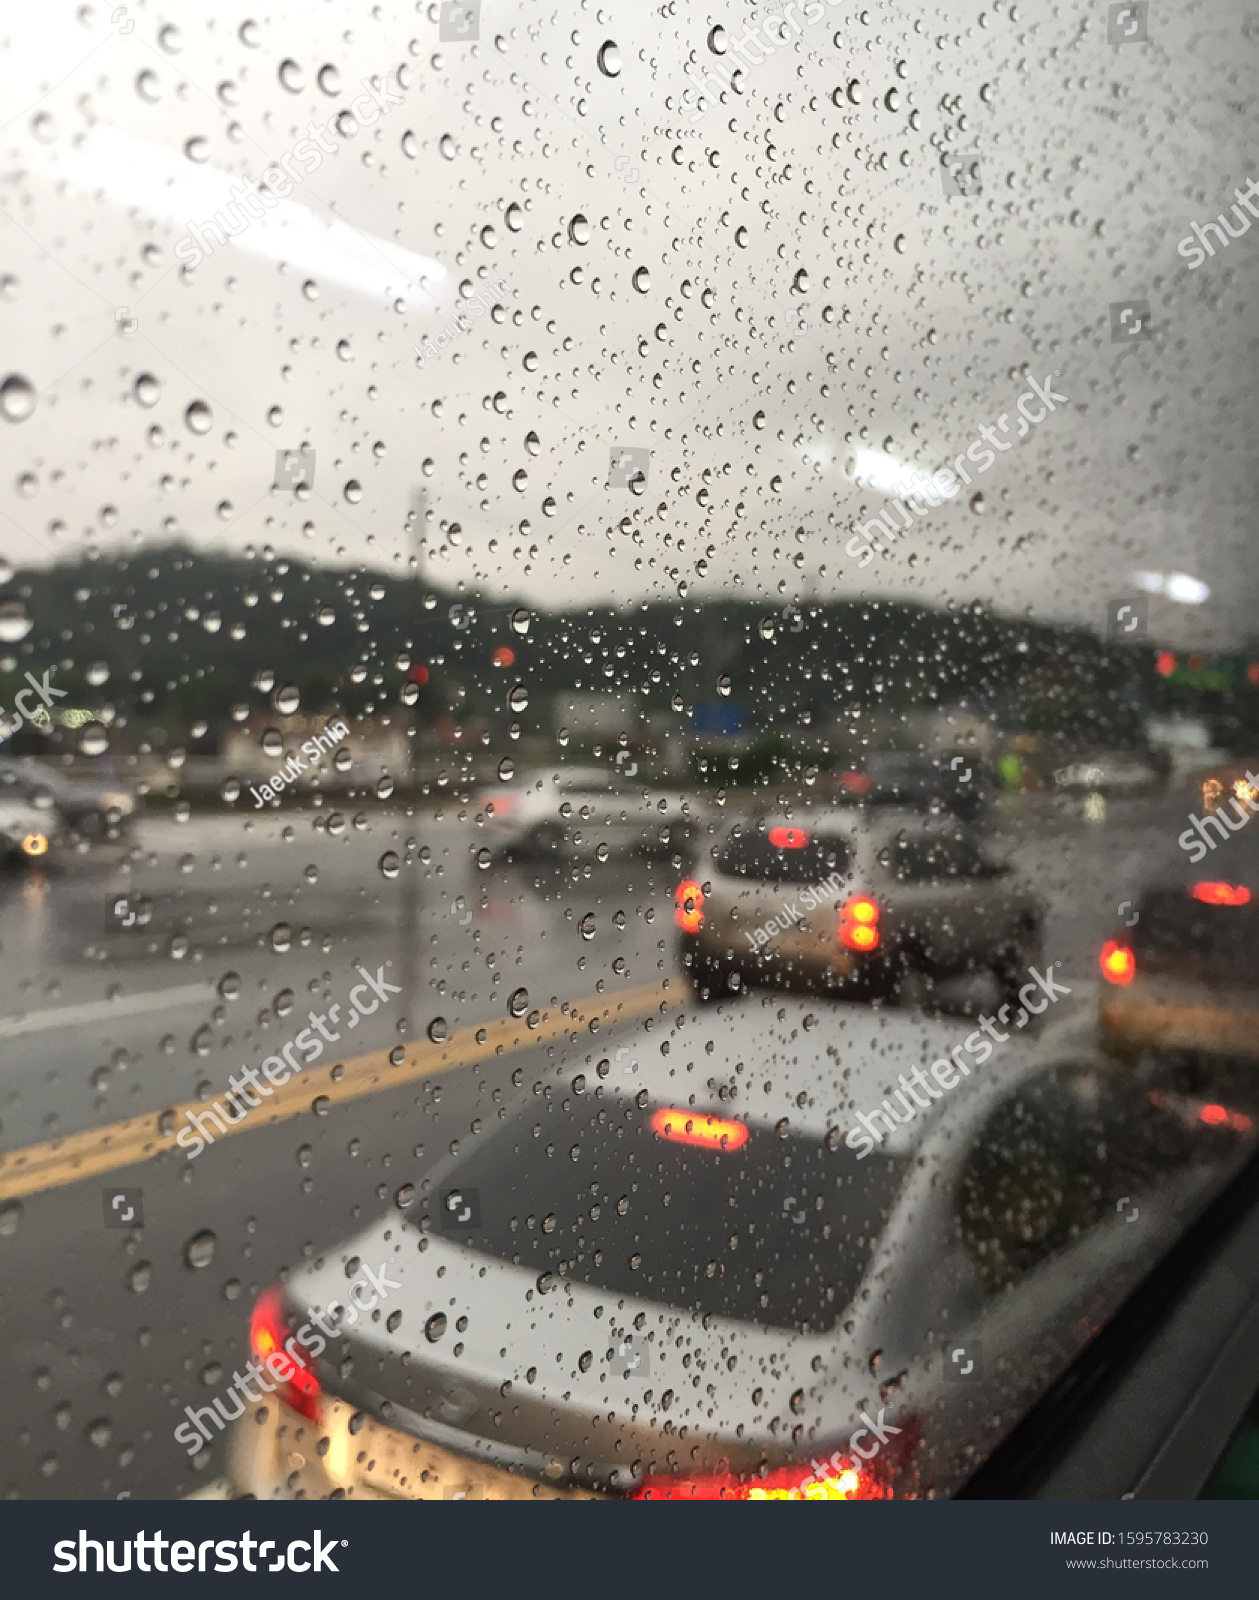 Rainy day scenery in the bus #1595783230